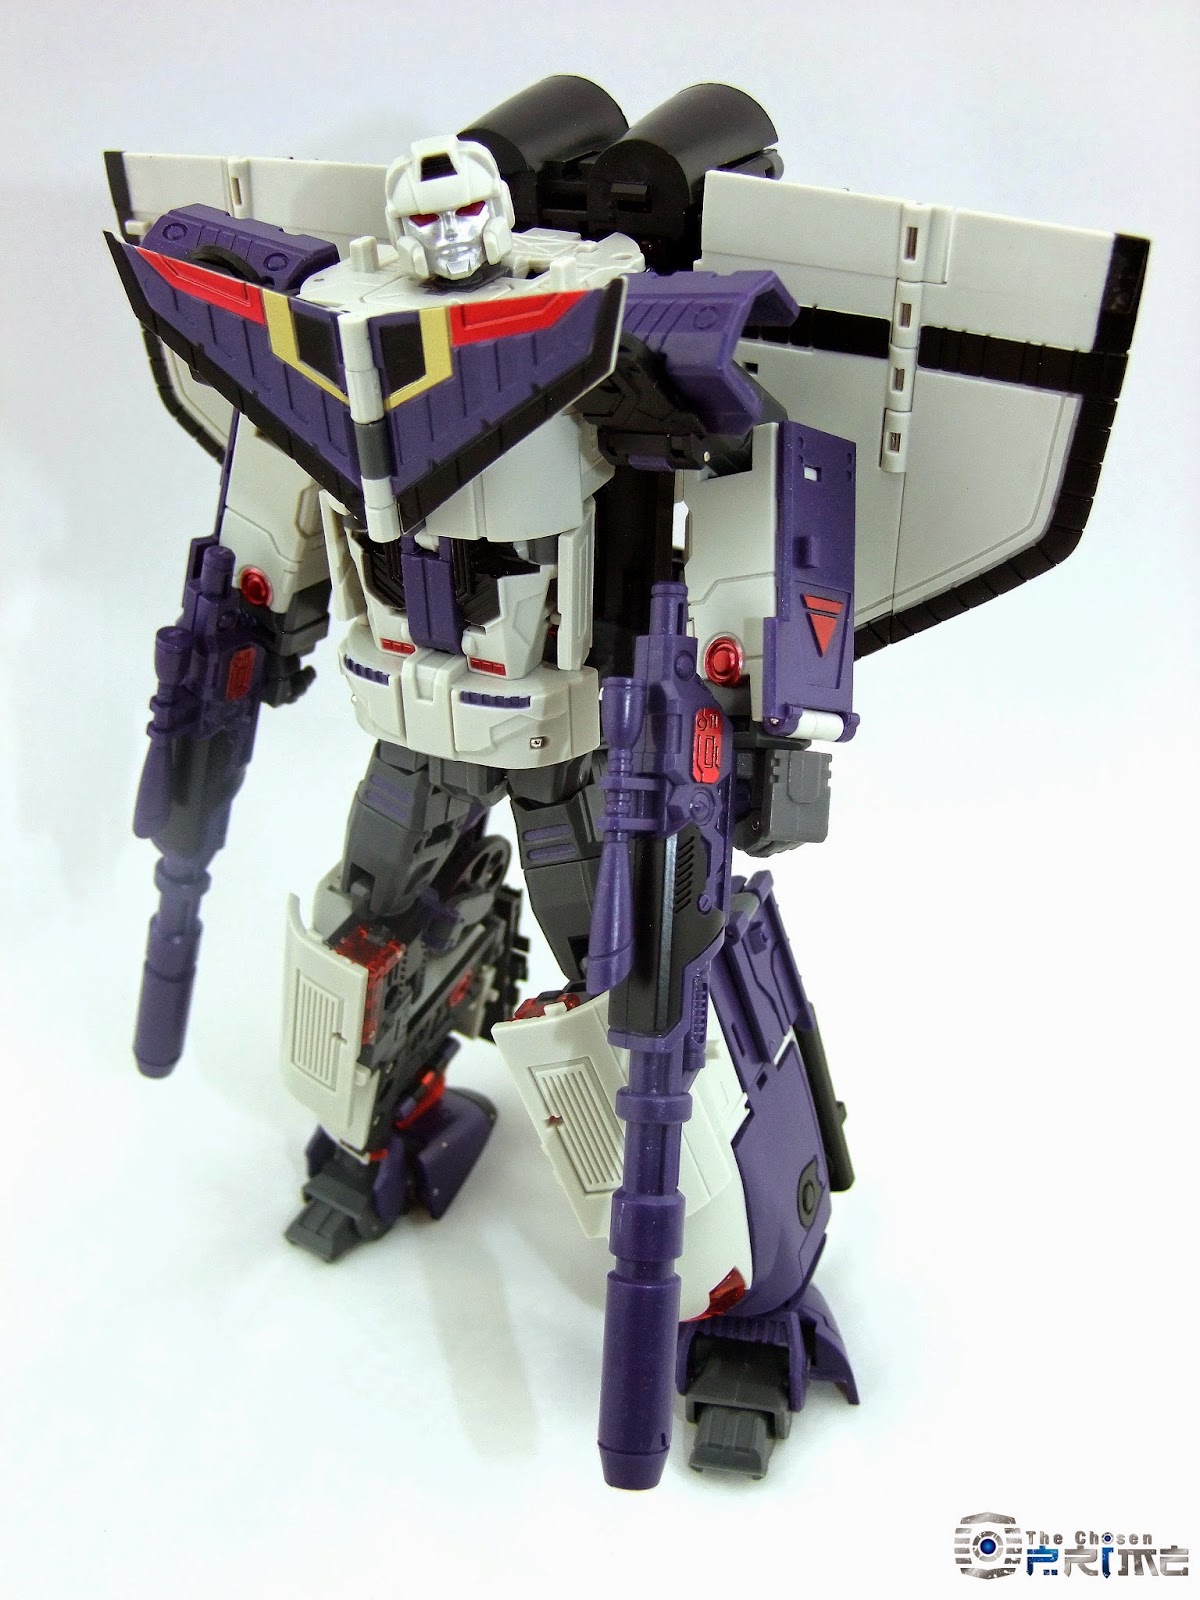 Transformers News: The Chosen Prime Newsletter for week of May 4, 2015